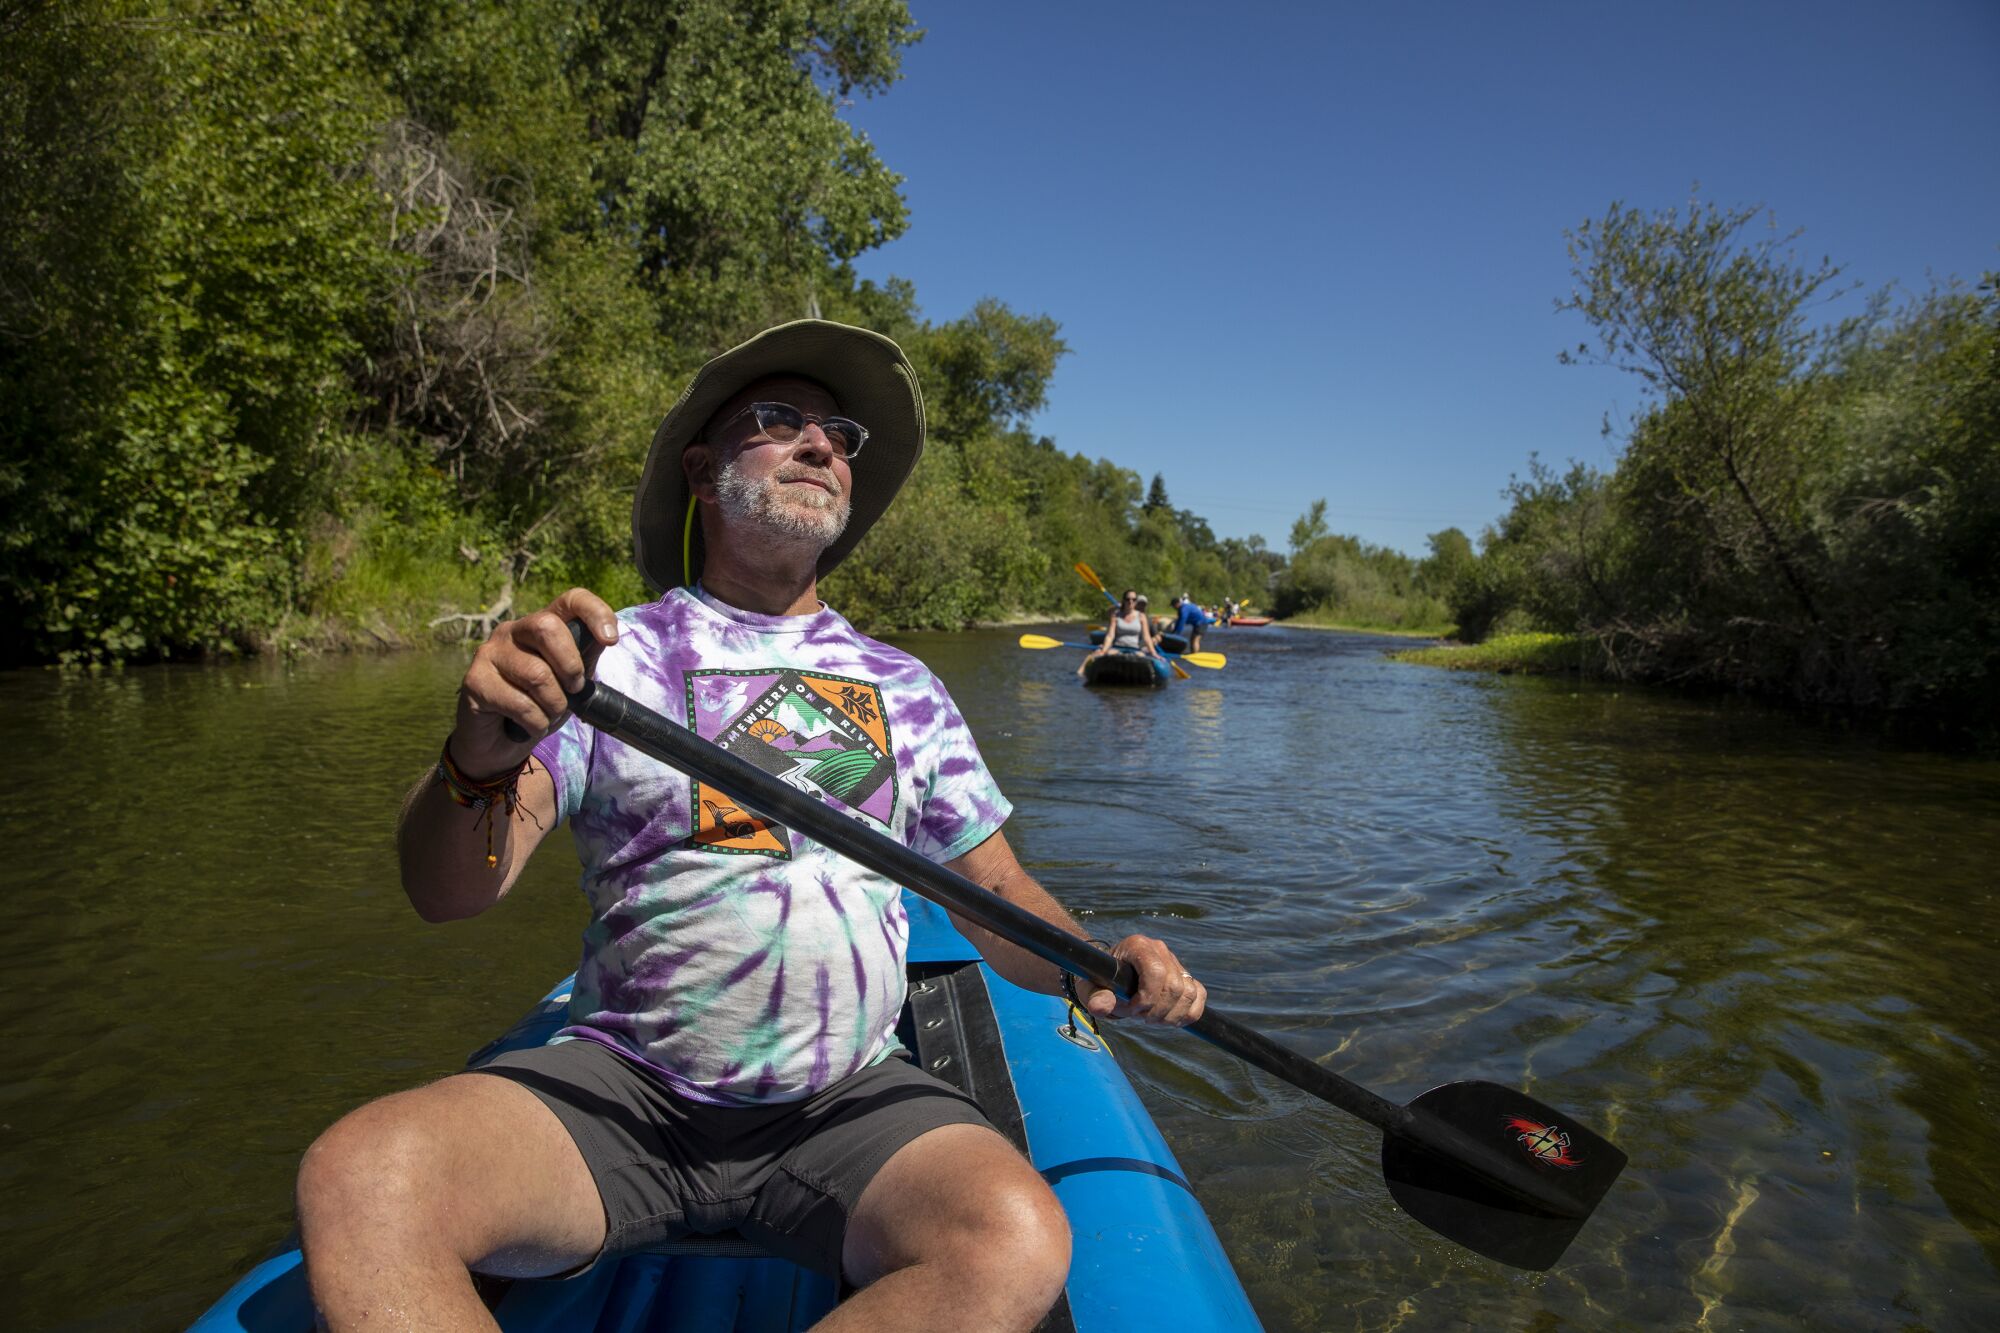 Larry Laba, owner of Russian River Adventures, paddles down the Russian River in Healdsburg, Calif.